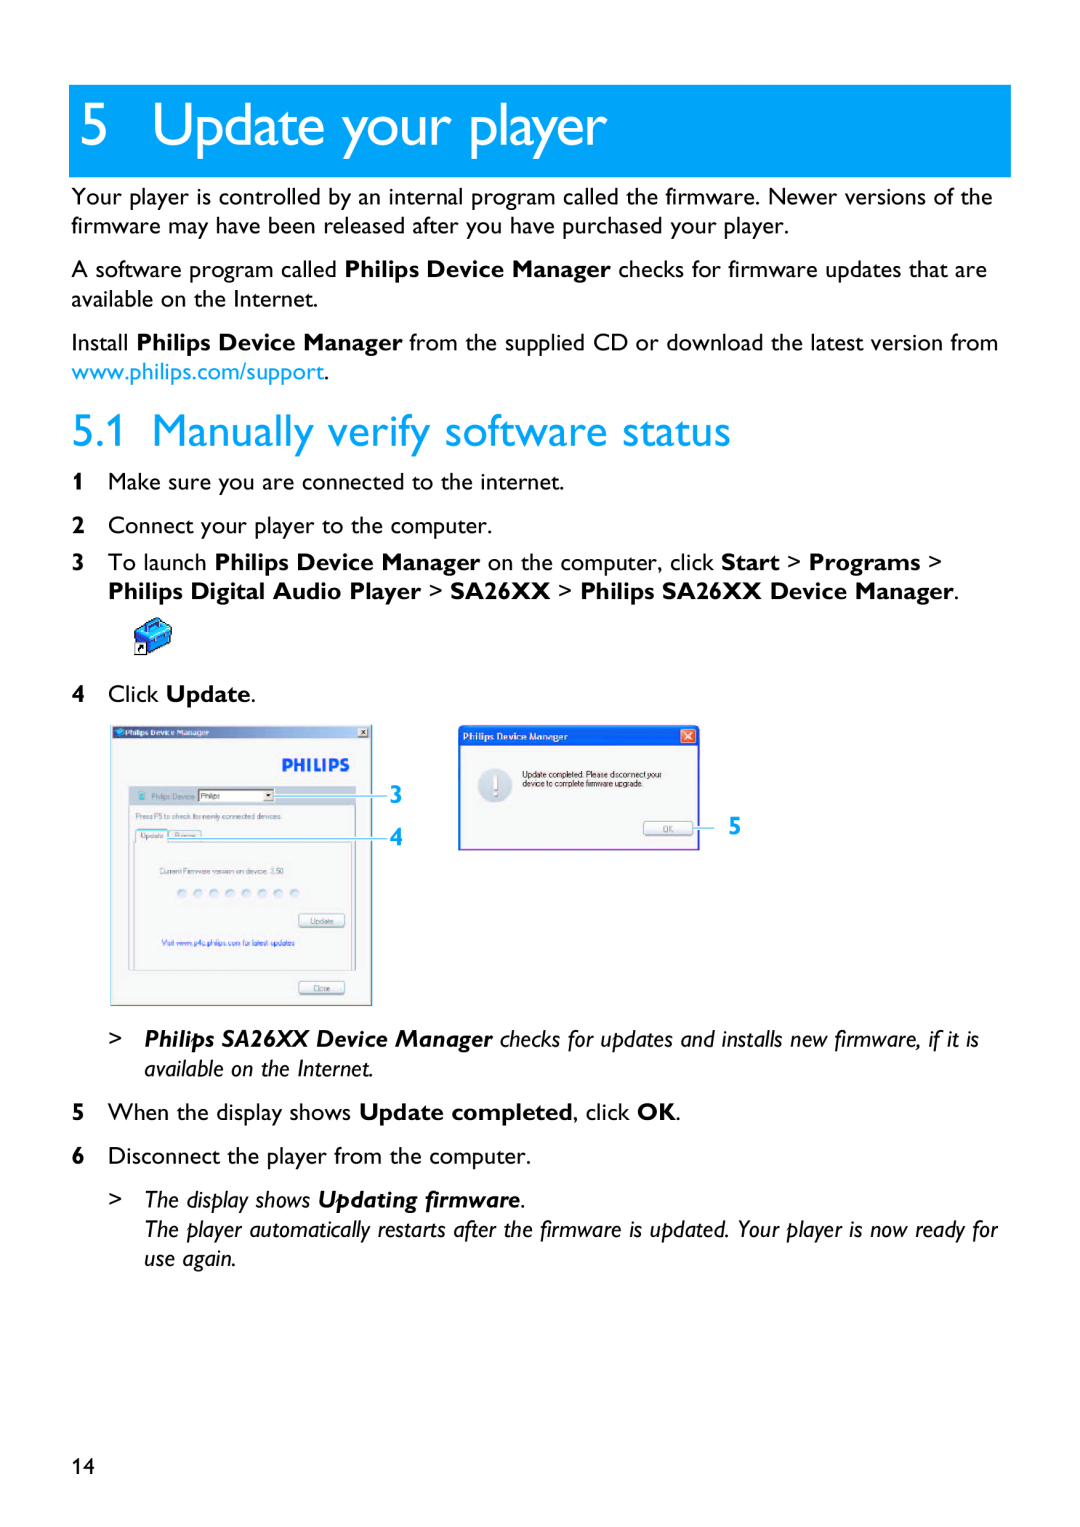 Philips SA2610 manual Update your player, Manually verify software status, The display shows Updating firmware 